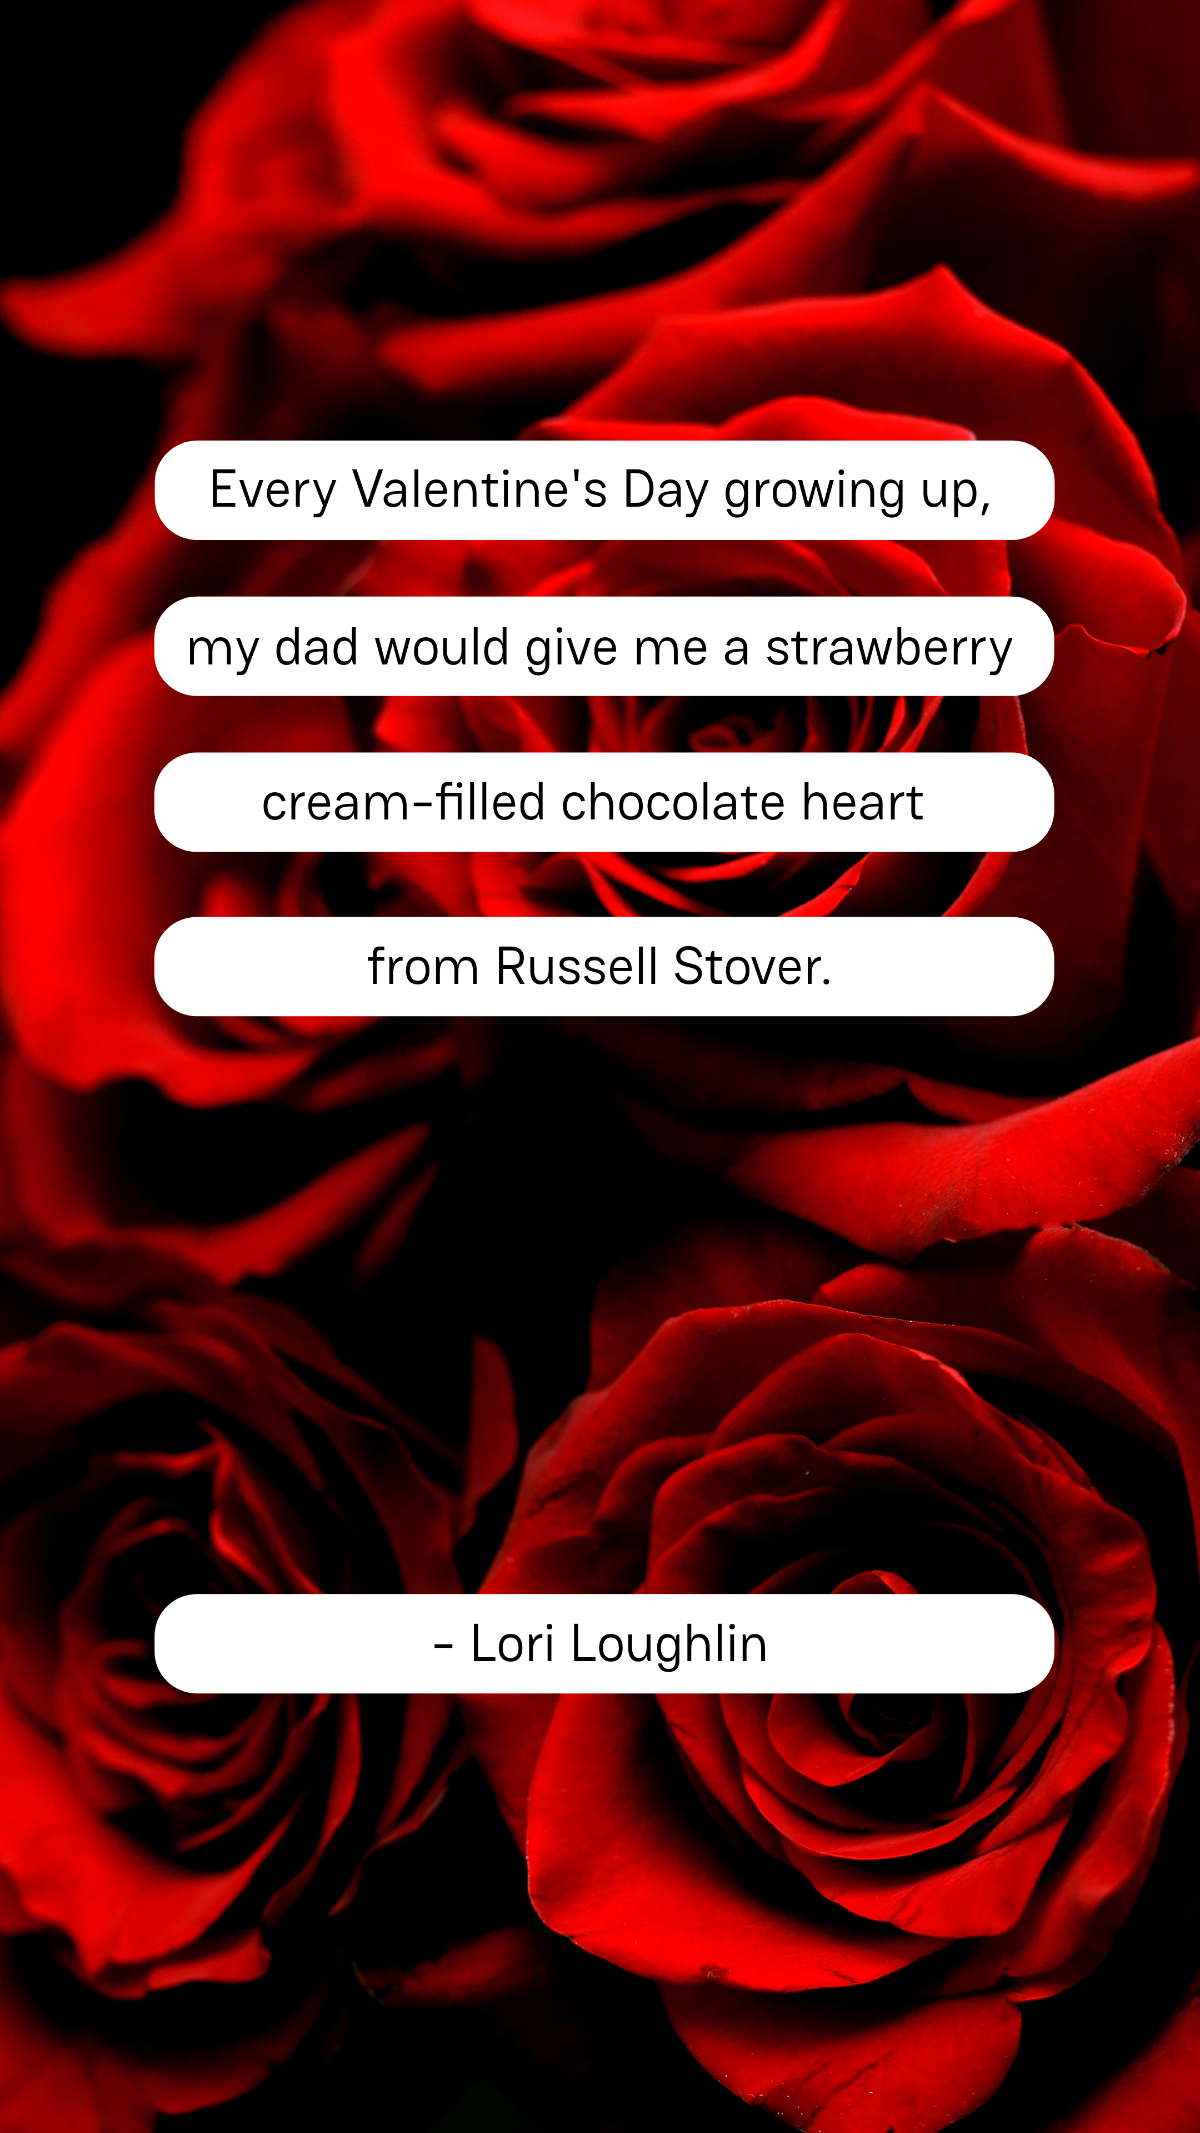 Lori Loughlin - Every Valentine's Day growing up, my dad would give me a strawberry cream-filled chocolate heart from Russell Stover. Template